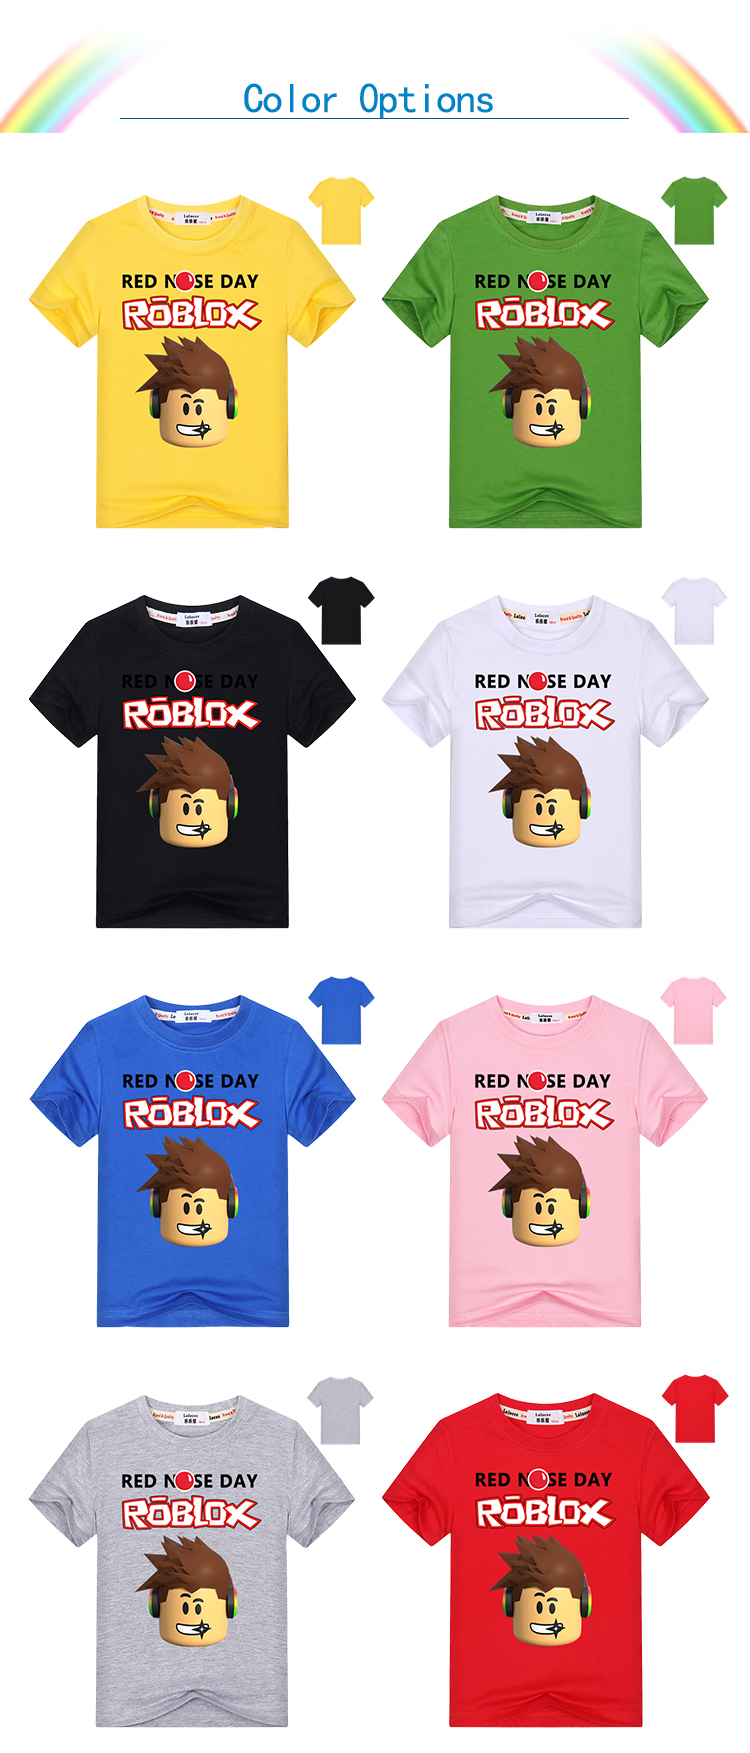 Qoo10 Bringing The Best To You - 2018 roblox costumes for boys children t shirt for kids